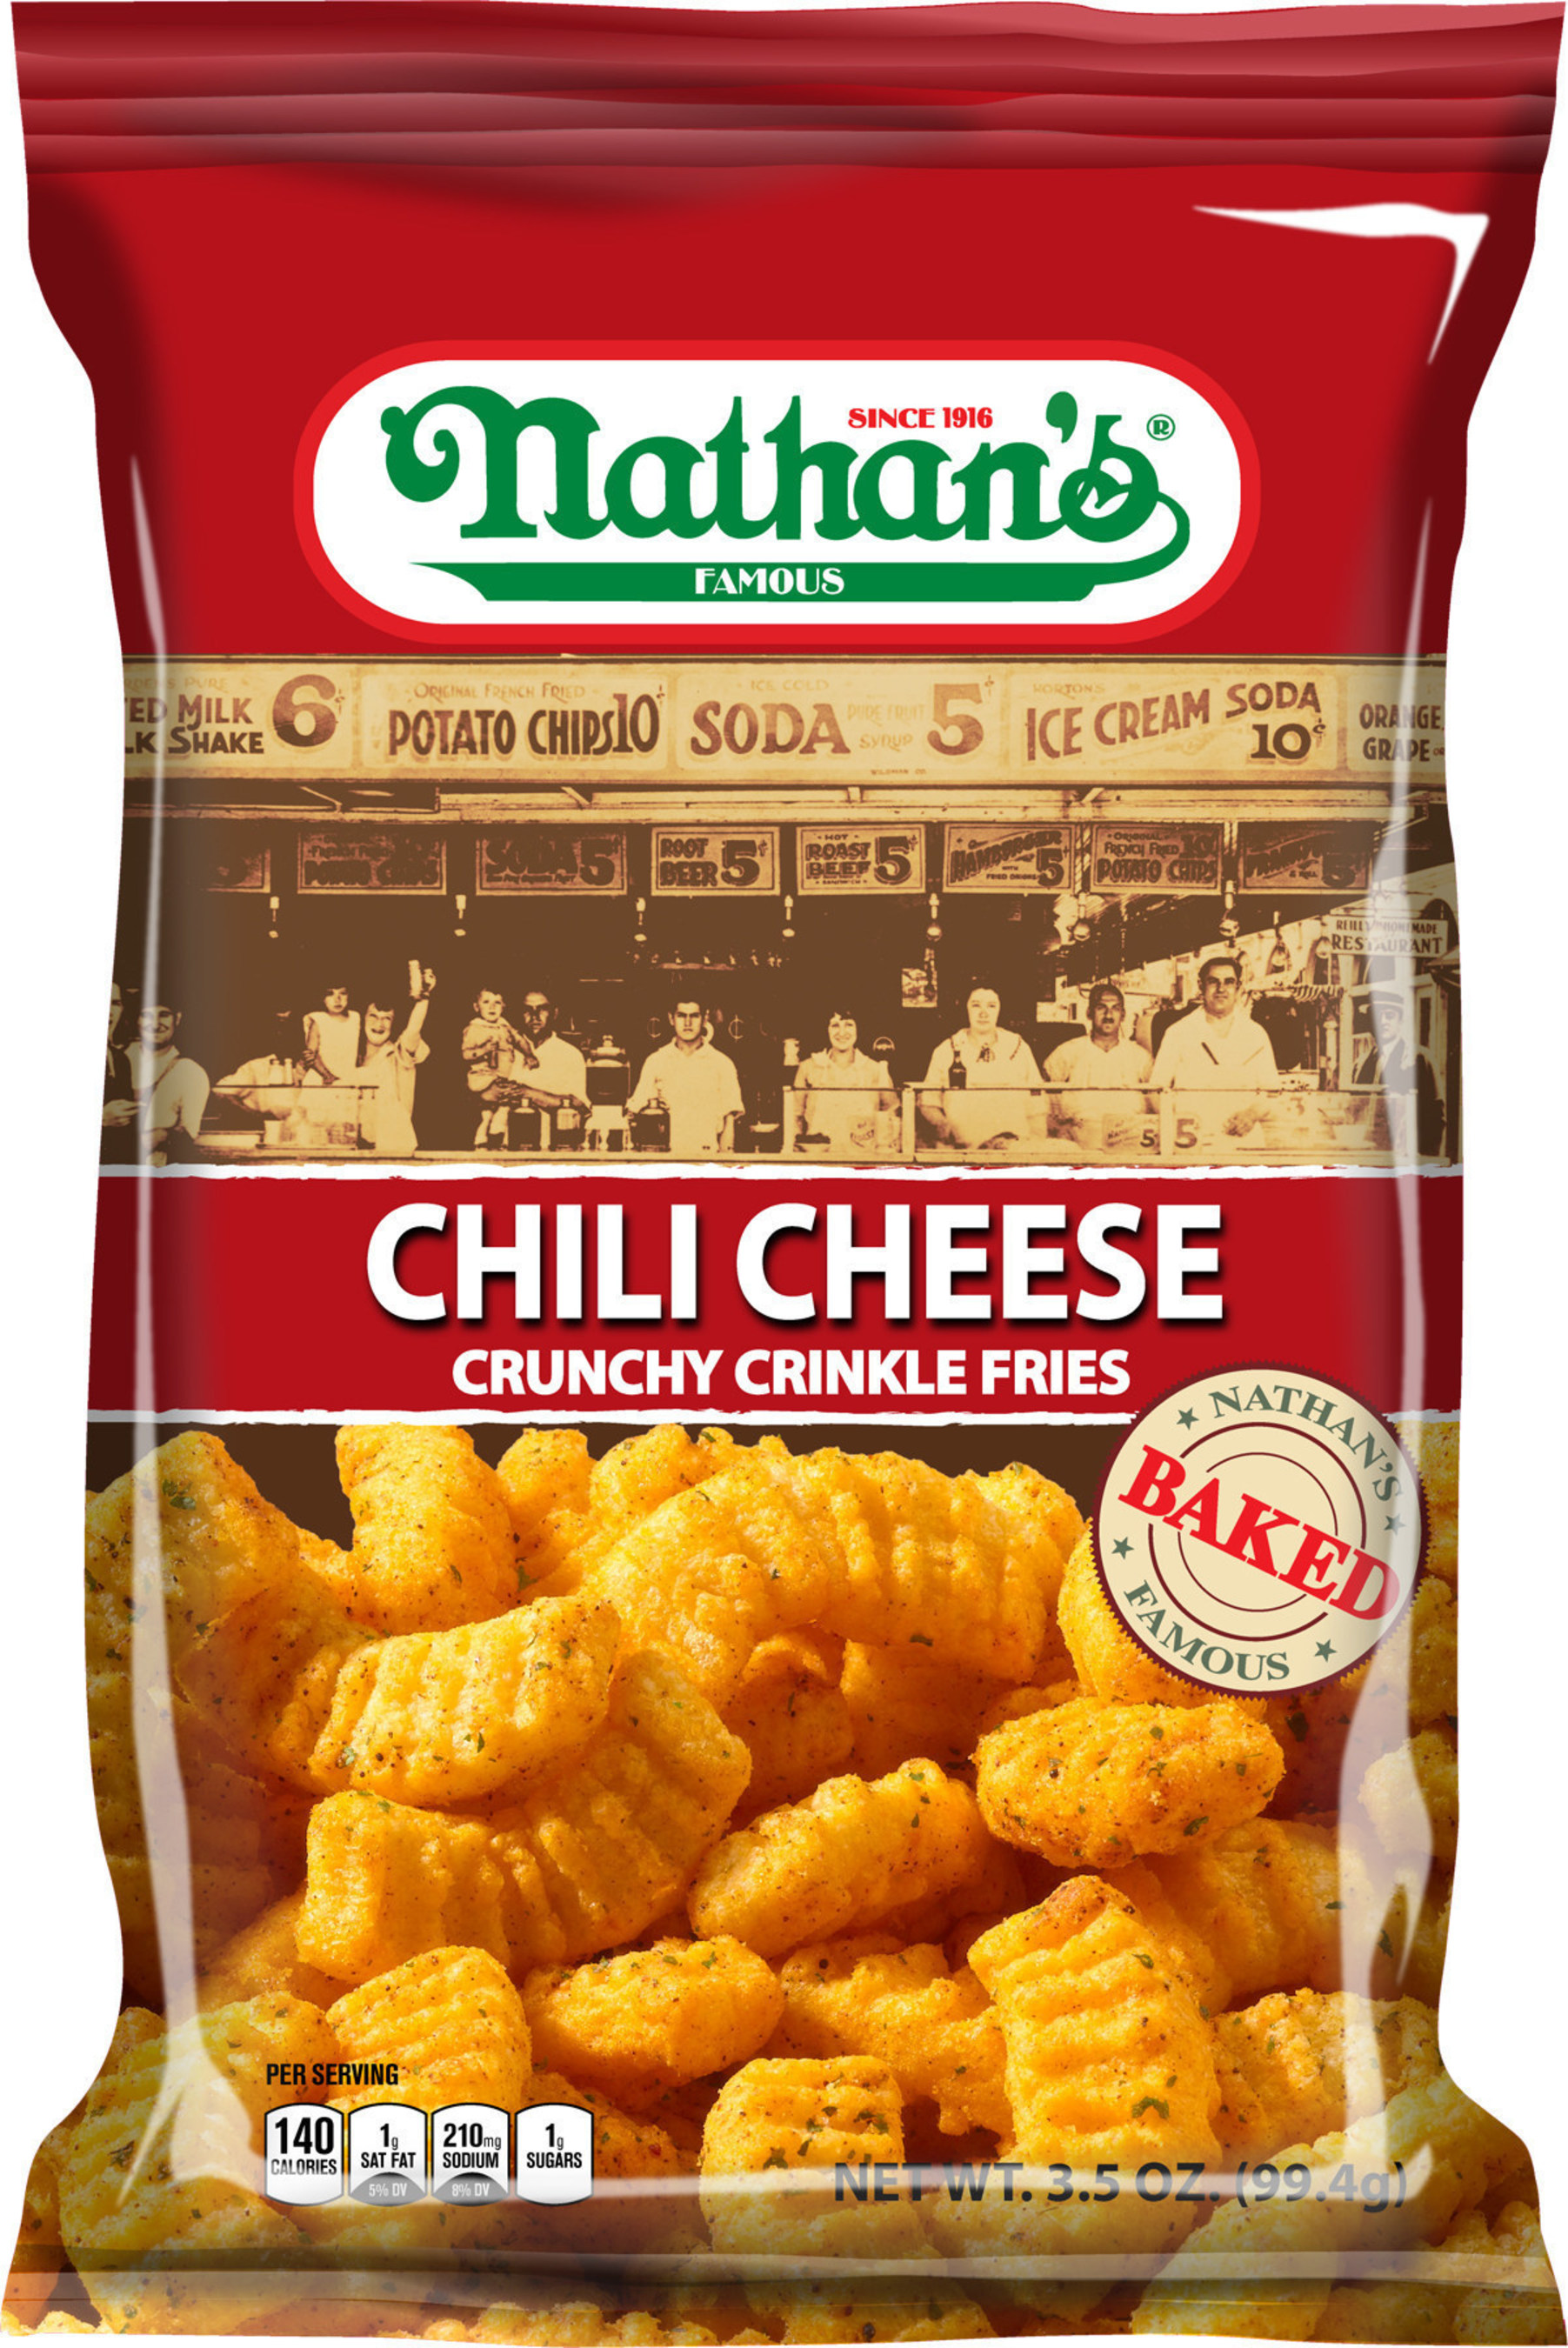 Nathan's Famous(R) Crunchy Crinkle Fries to appear on Cooking Channel's 'Unwrapped 2.0'